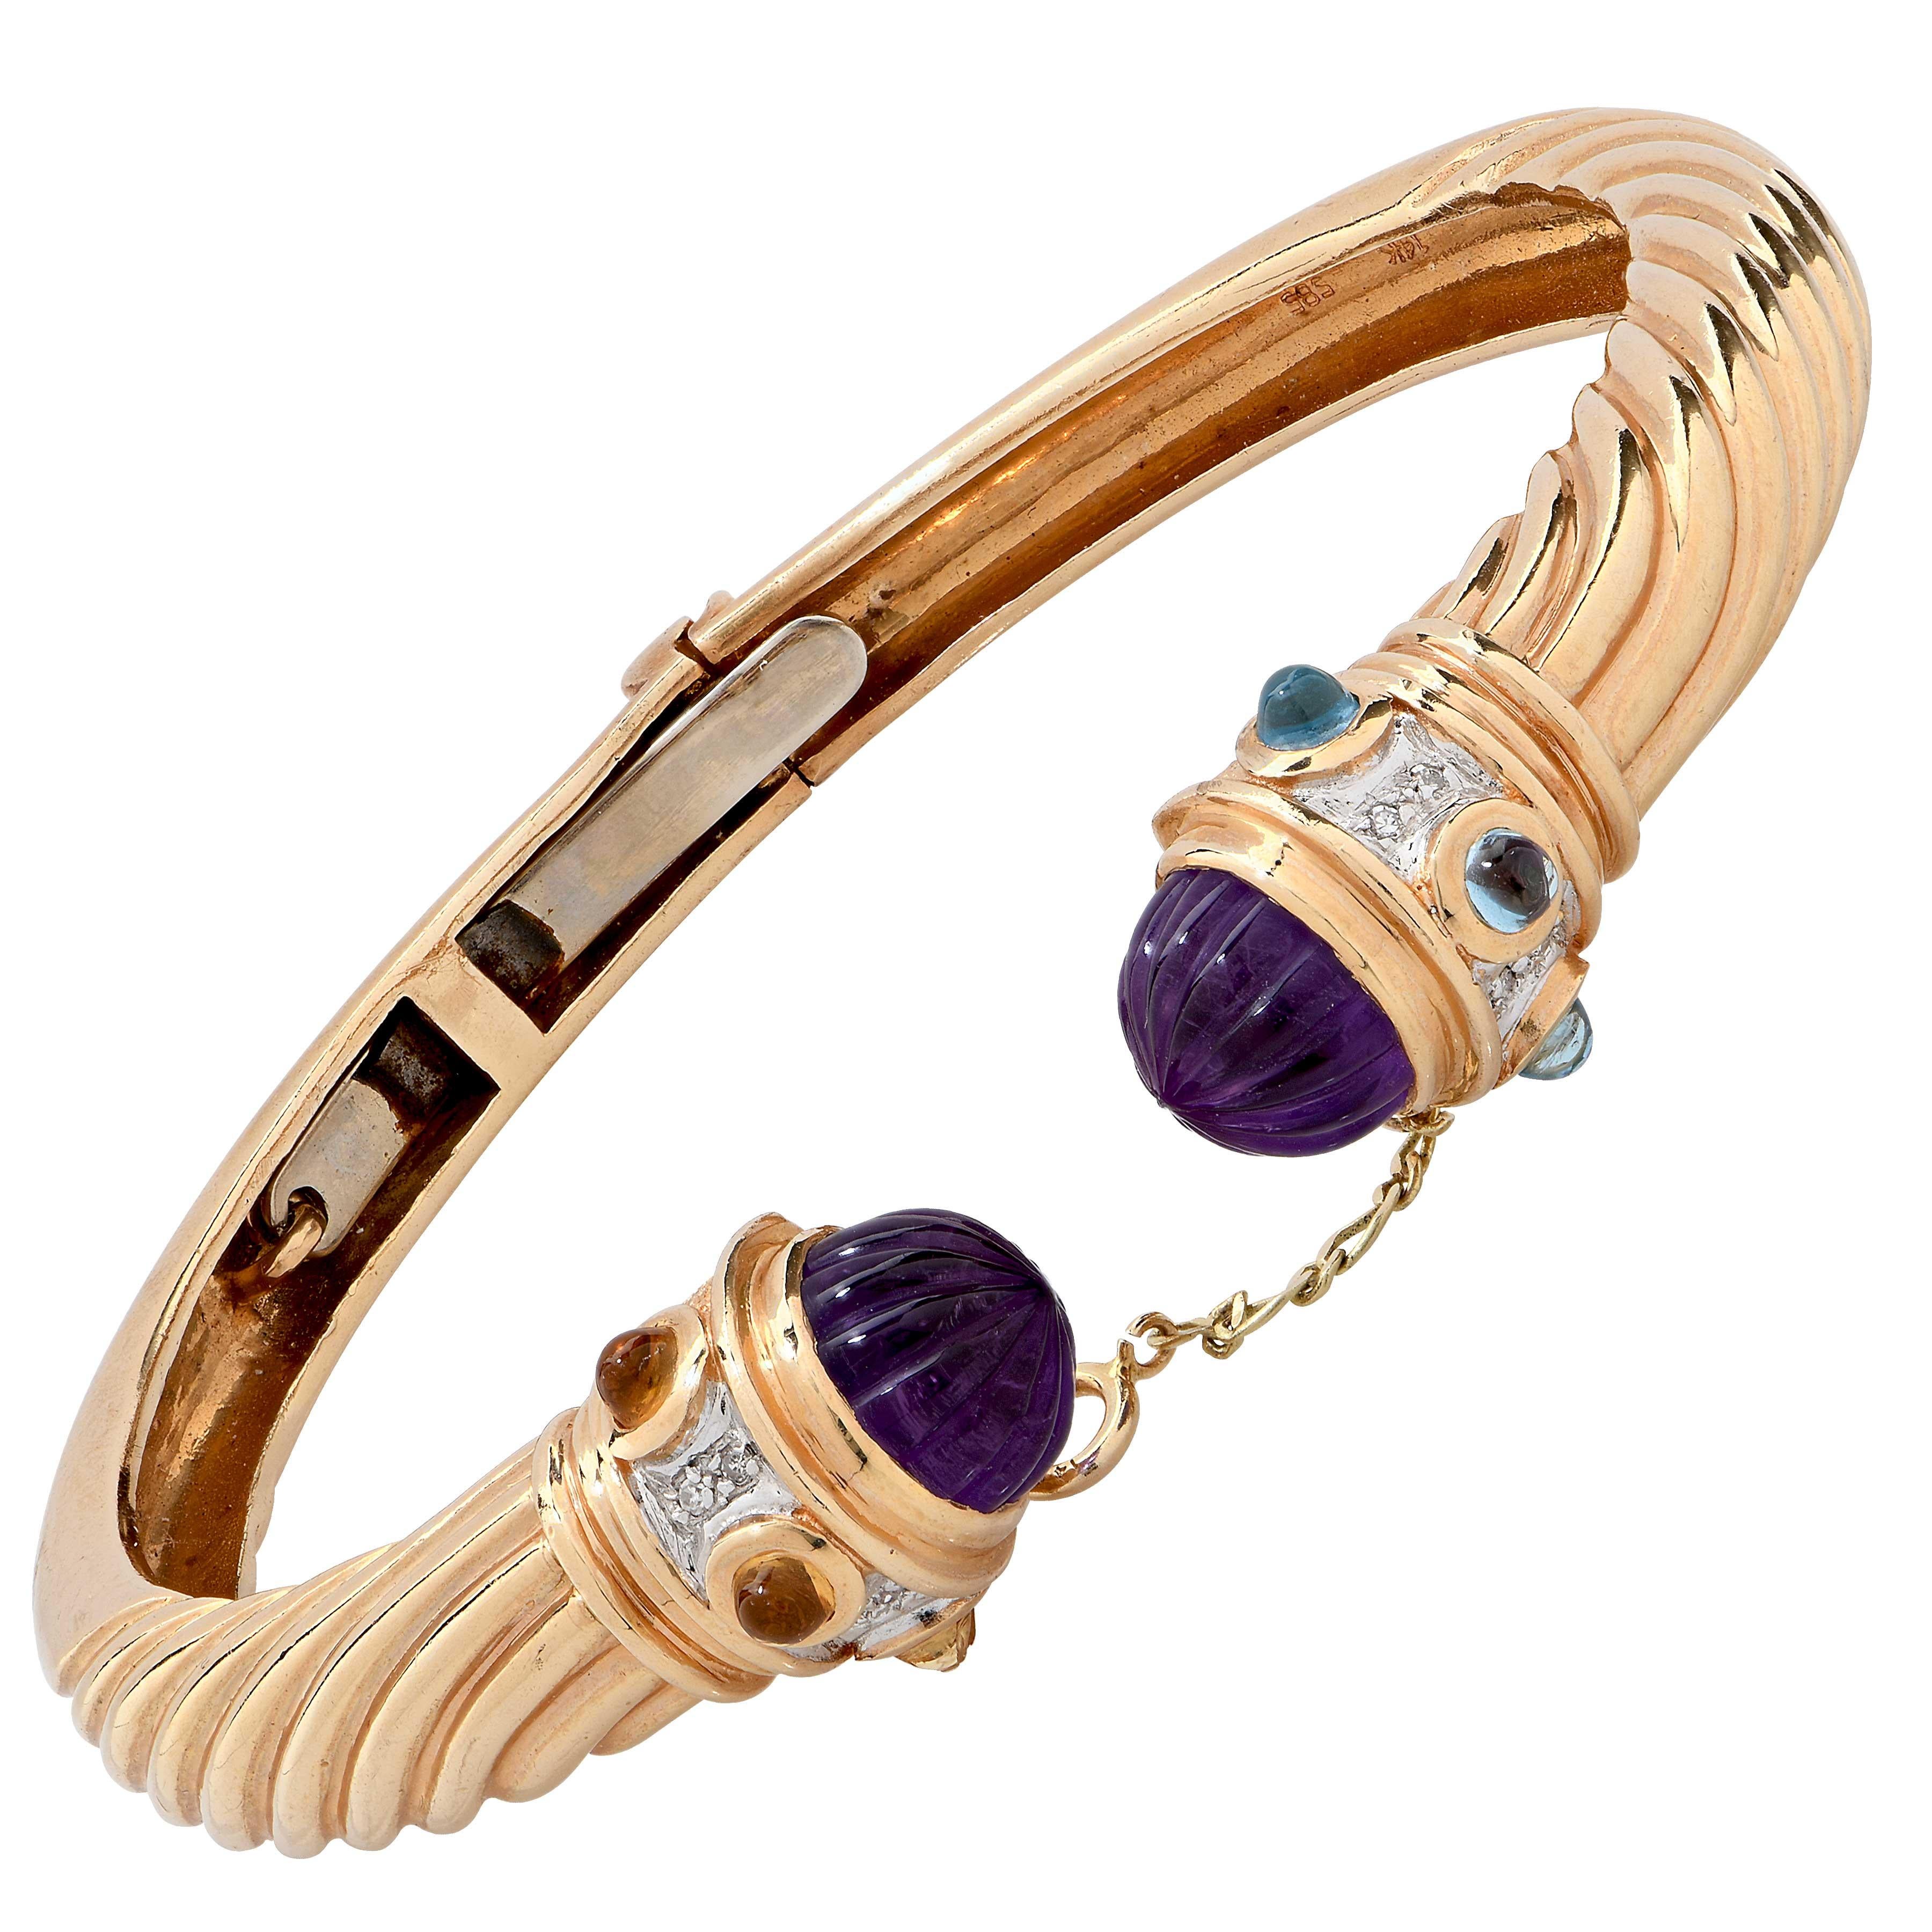 Yellow Gold Bangle with Amethyst Accents in 14 Karat Yellow Gold.
Metal Type: 14 Karat Yellow Gold.
Metal Weight: 29.26 Grams